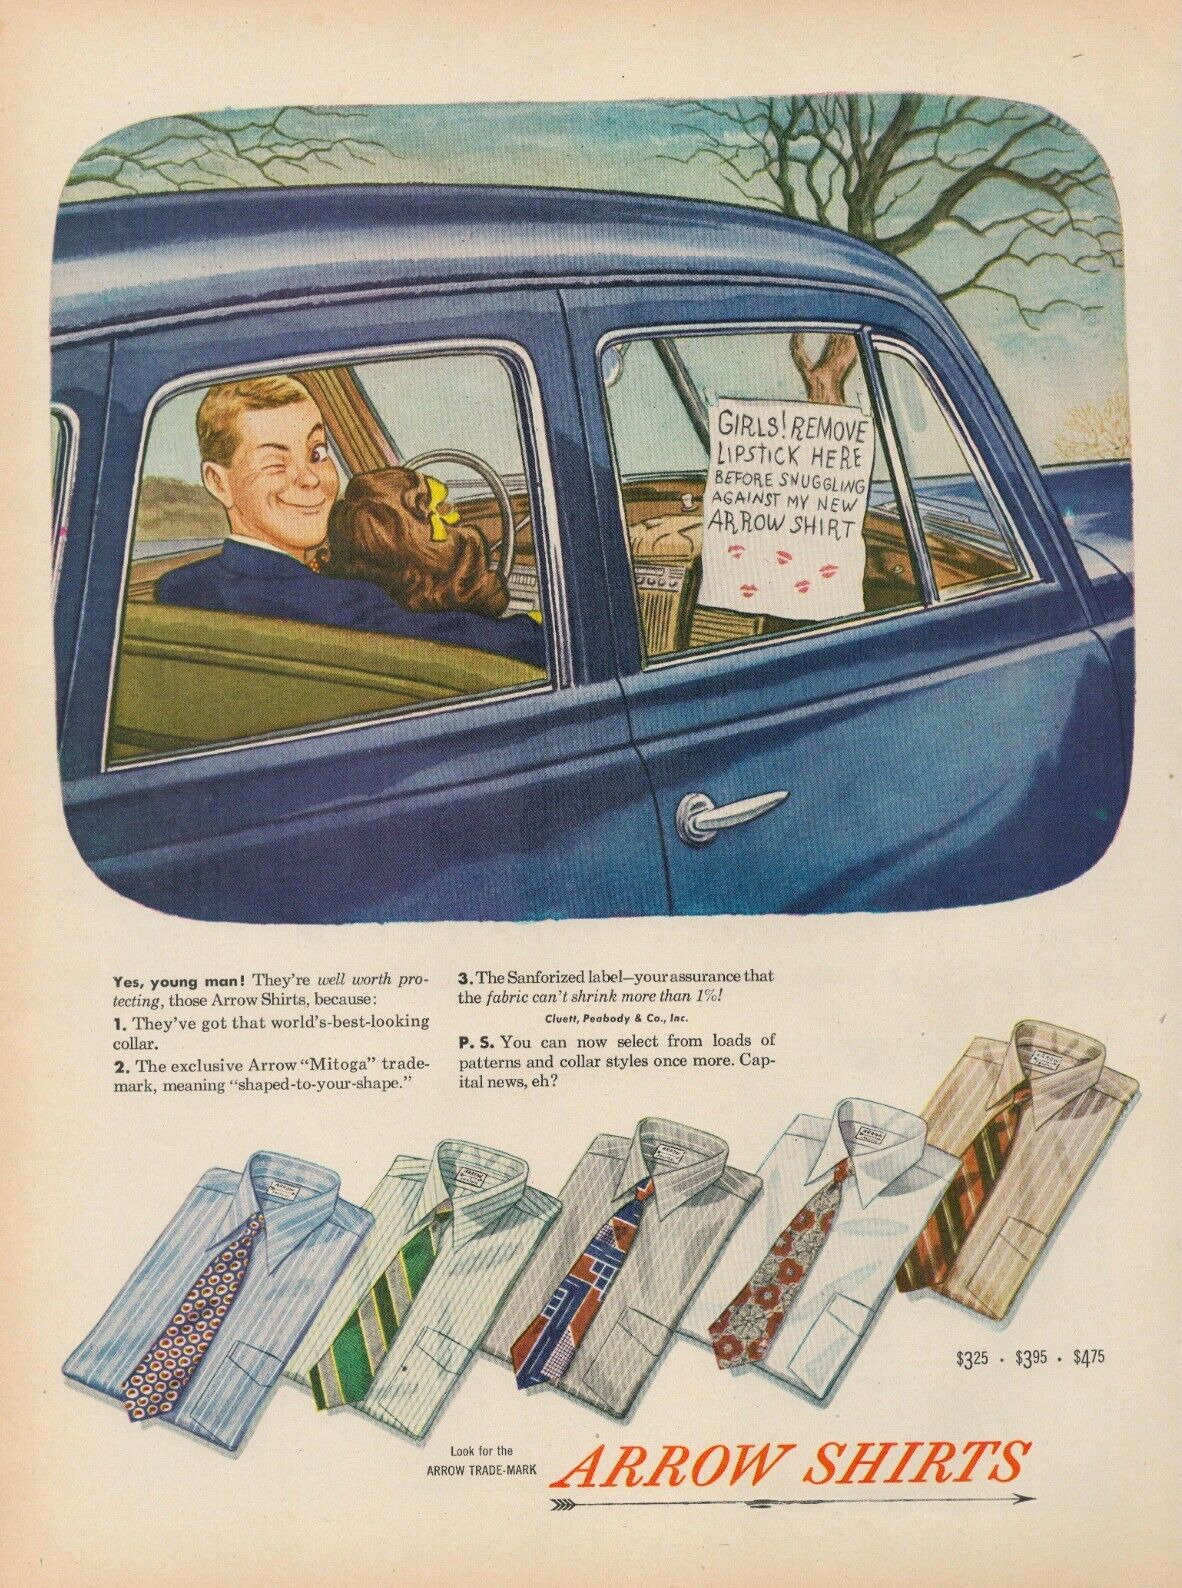 1947 Arrow Shirts Girl Remove Lipstick Here Before Snuggling Against Print Ad